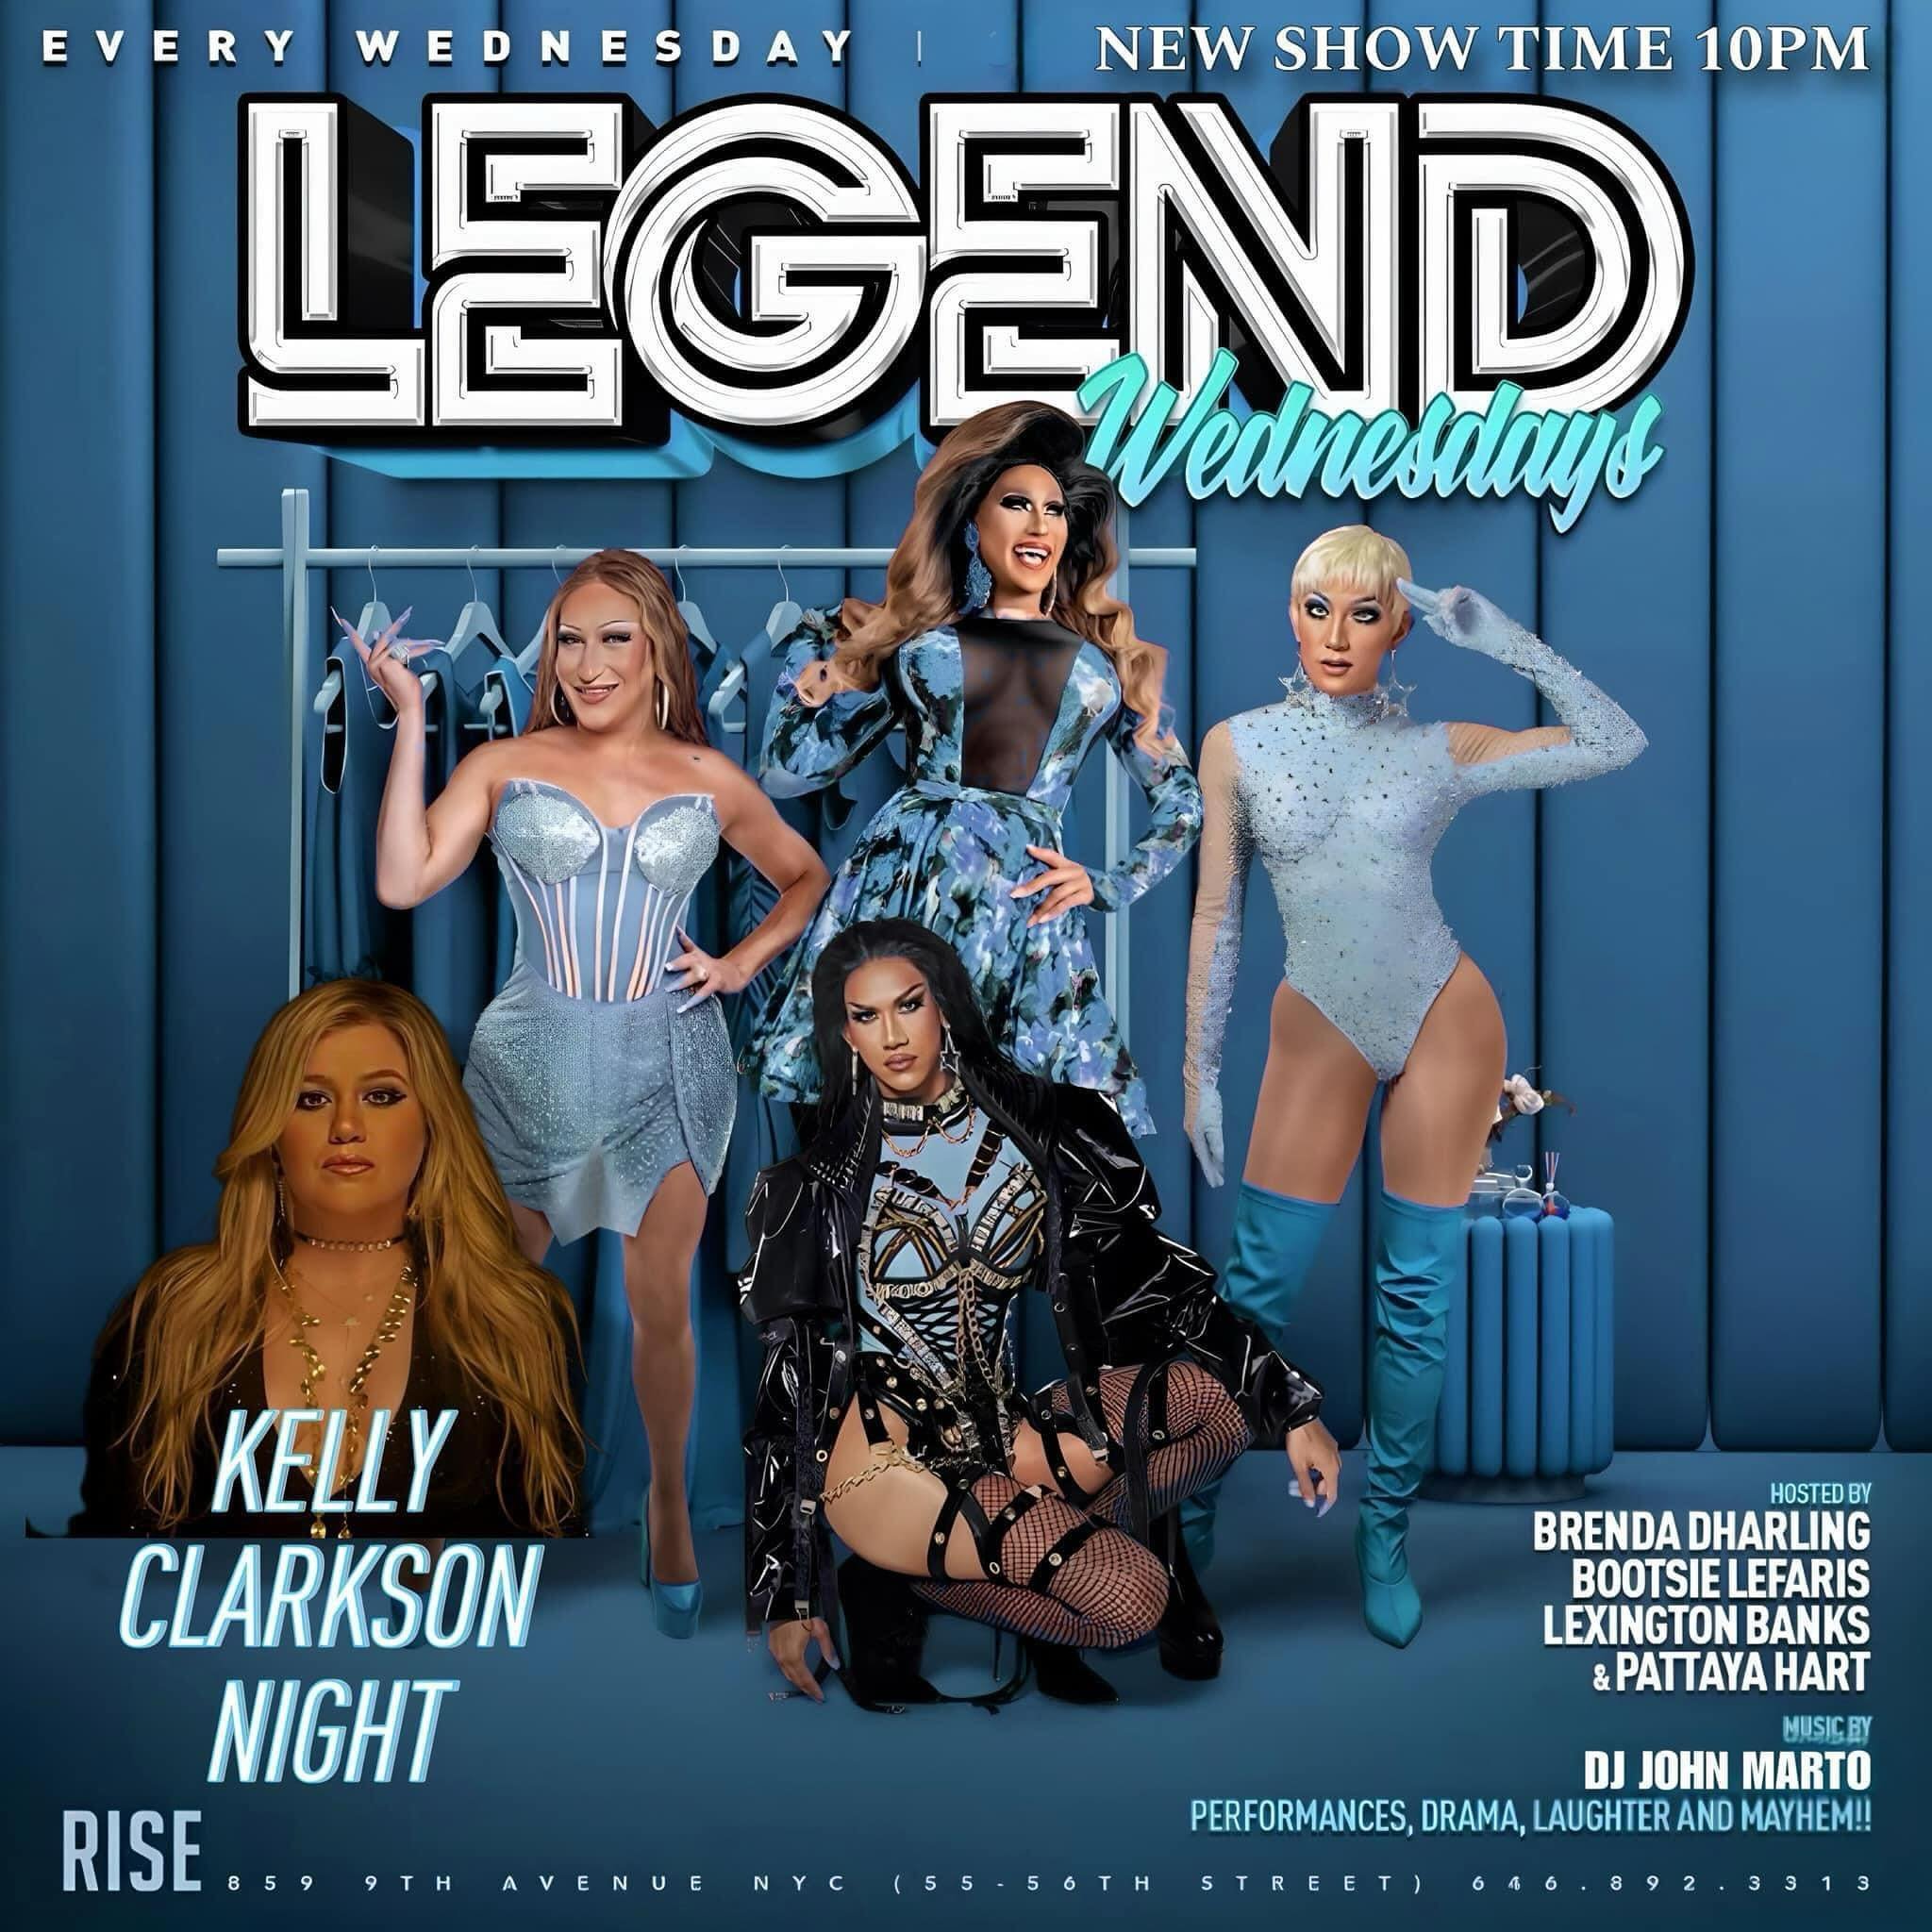 Kelly Clarkson night TONIGHT at Rise for Legend Wednesdays! Show time at 10!